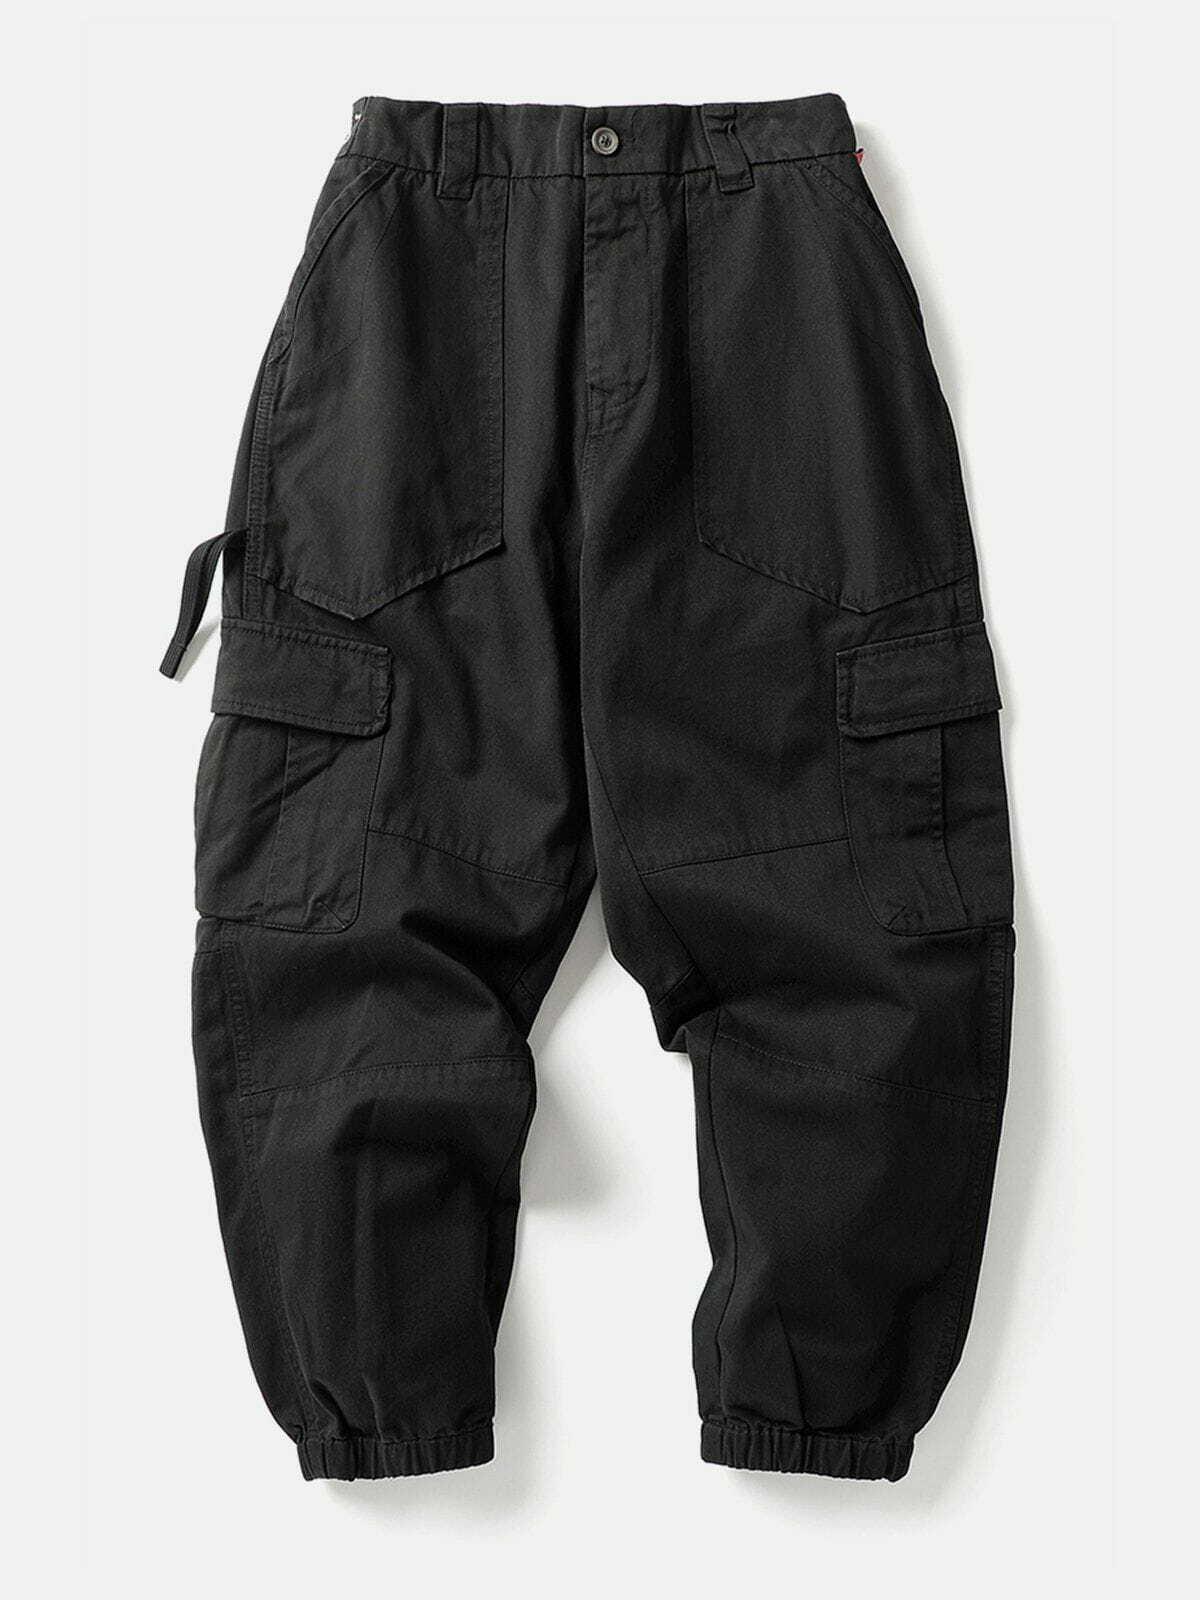 retro cargo pants with edgy style & multiple pockets 2941